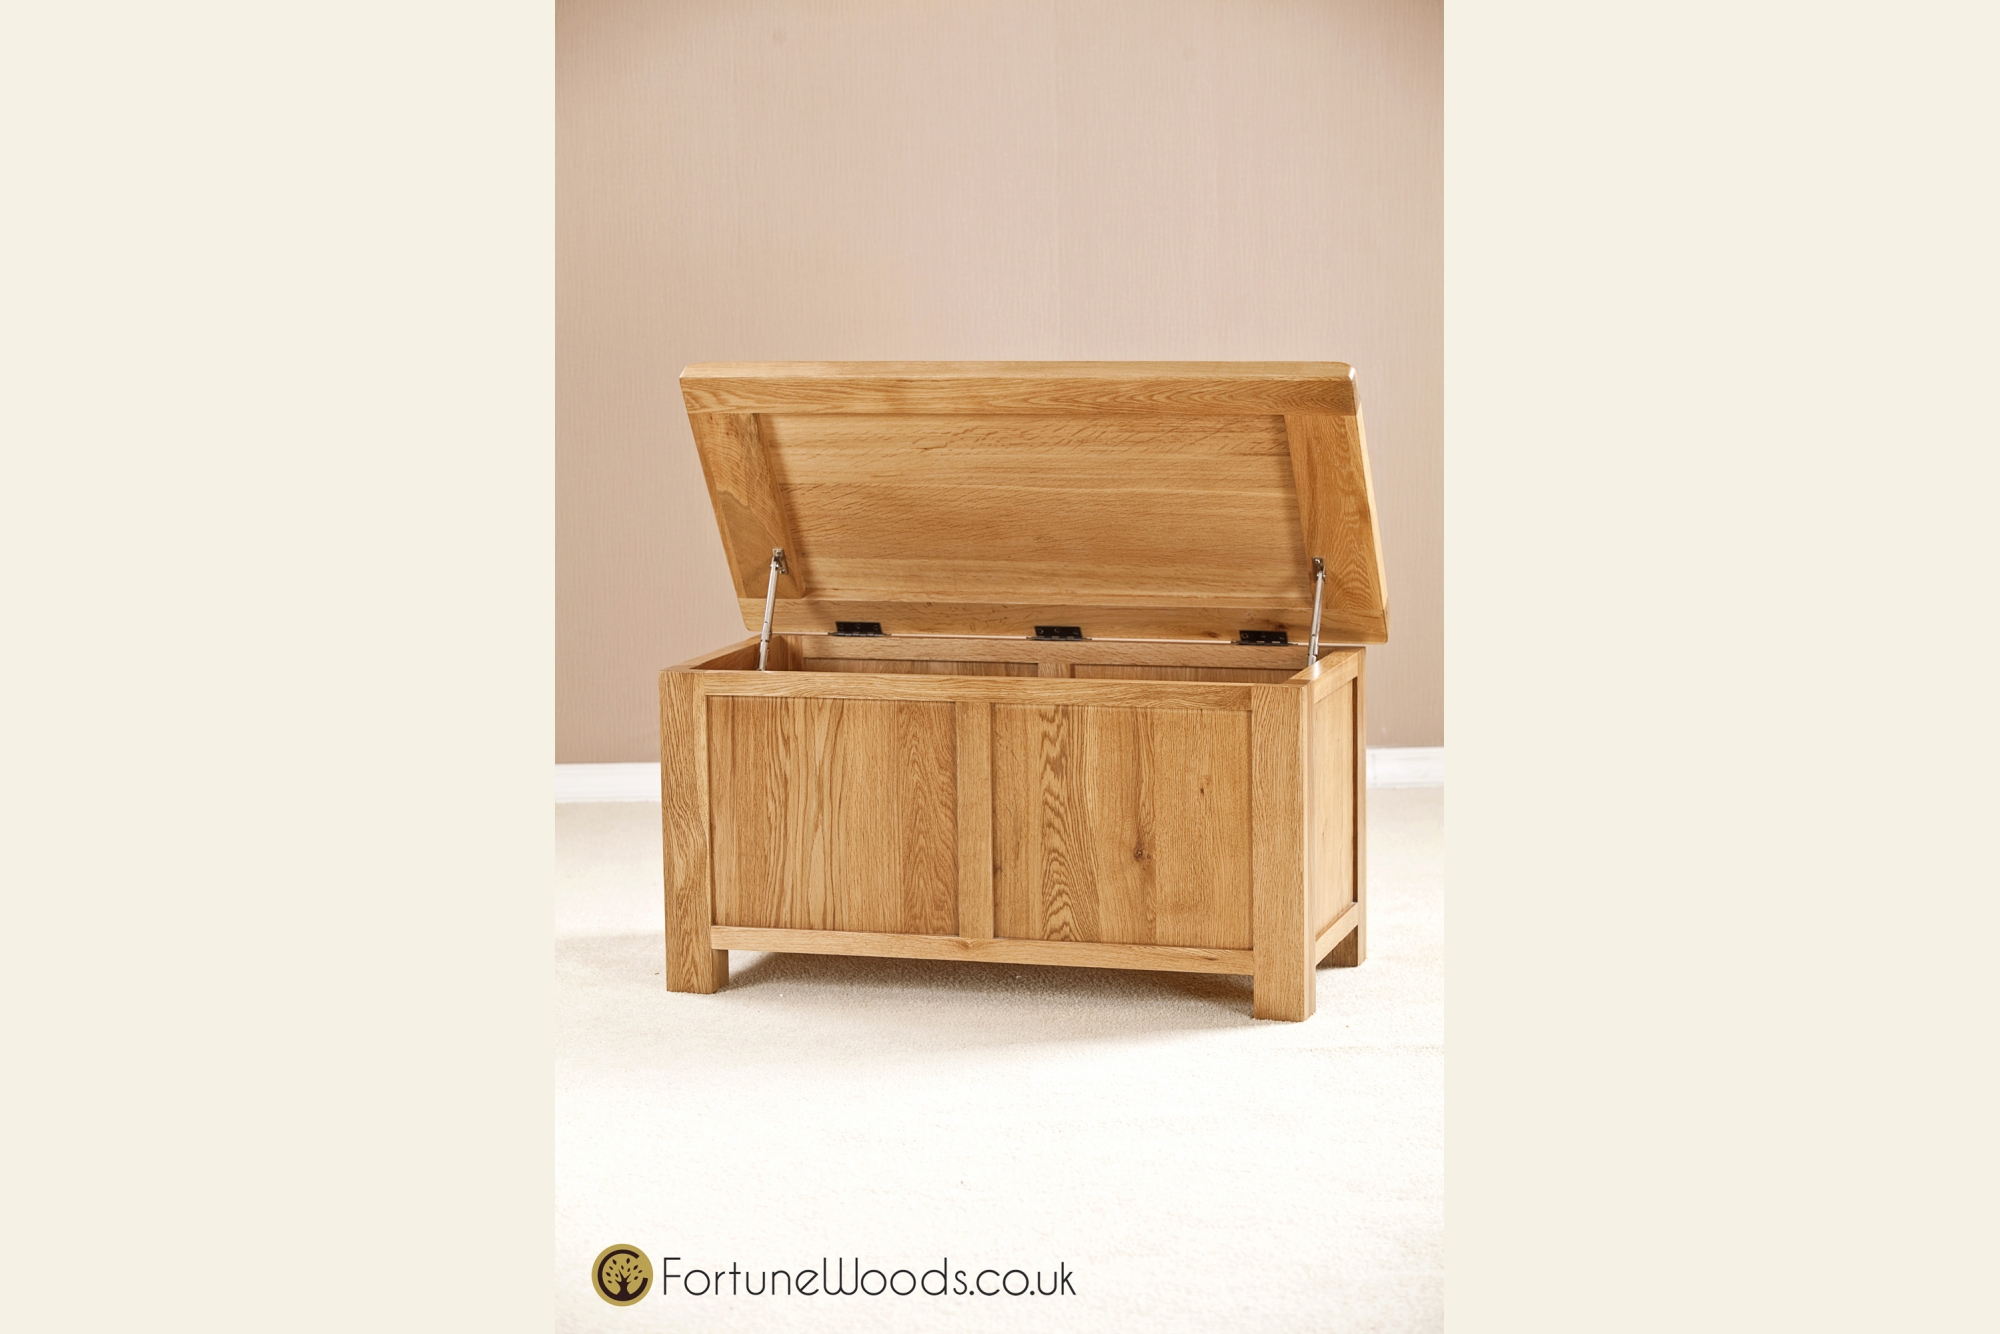 Fortune Woods Cotswold Blanket Box